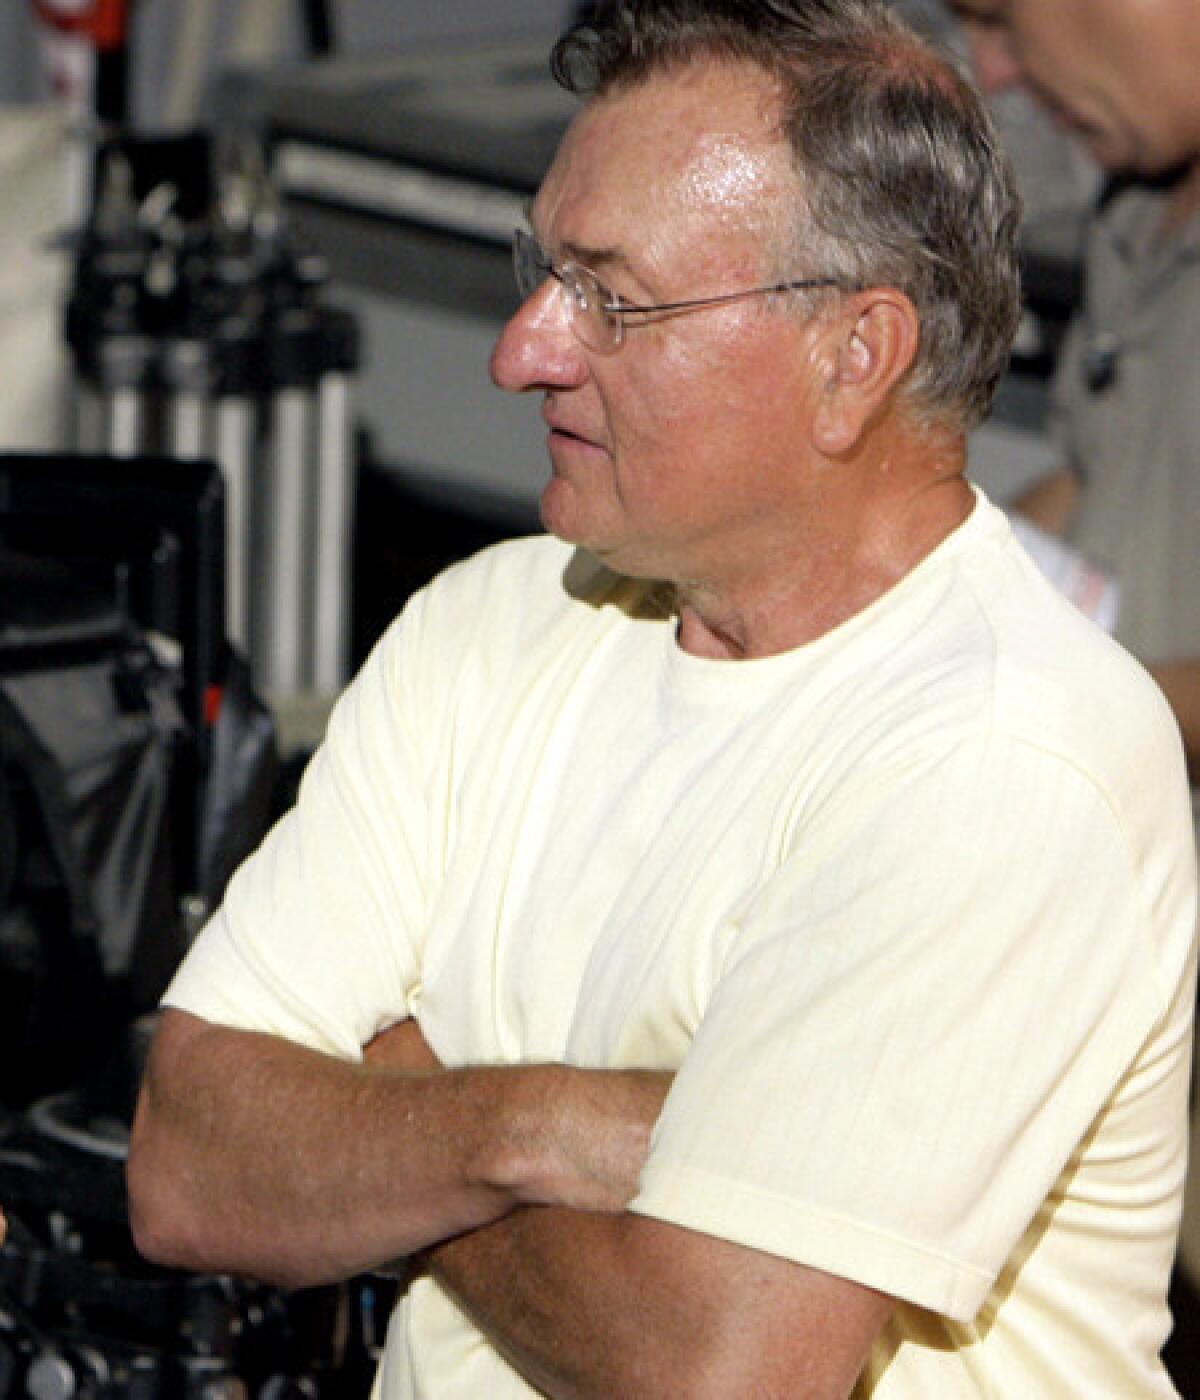 Ed Rush on the set of a movie shoot in 2007.